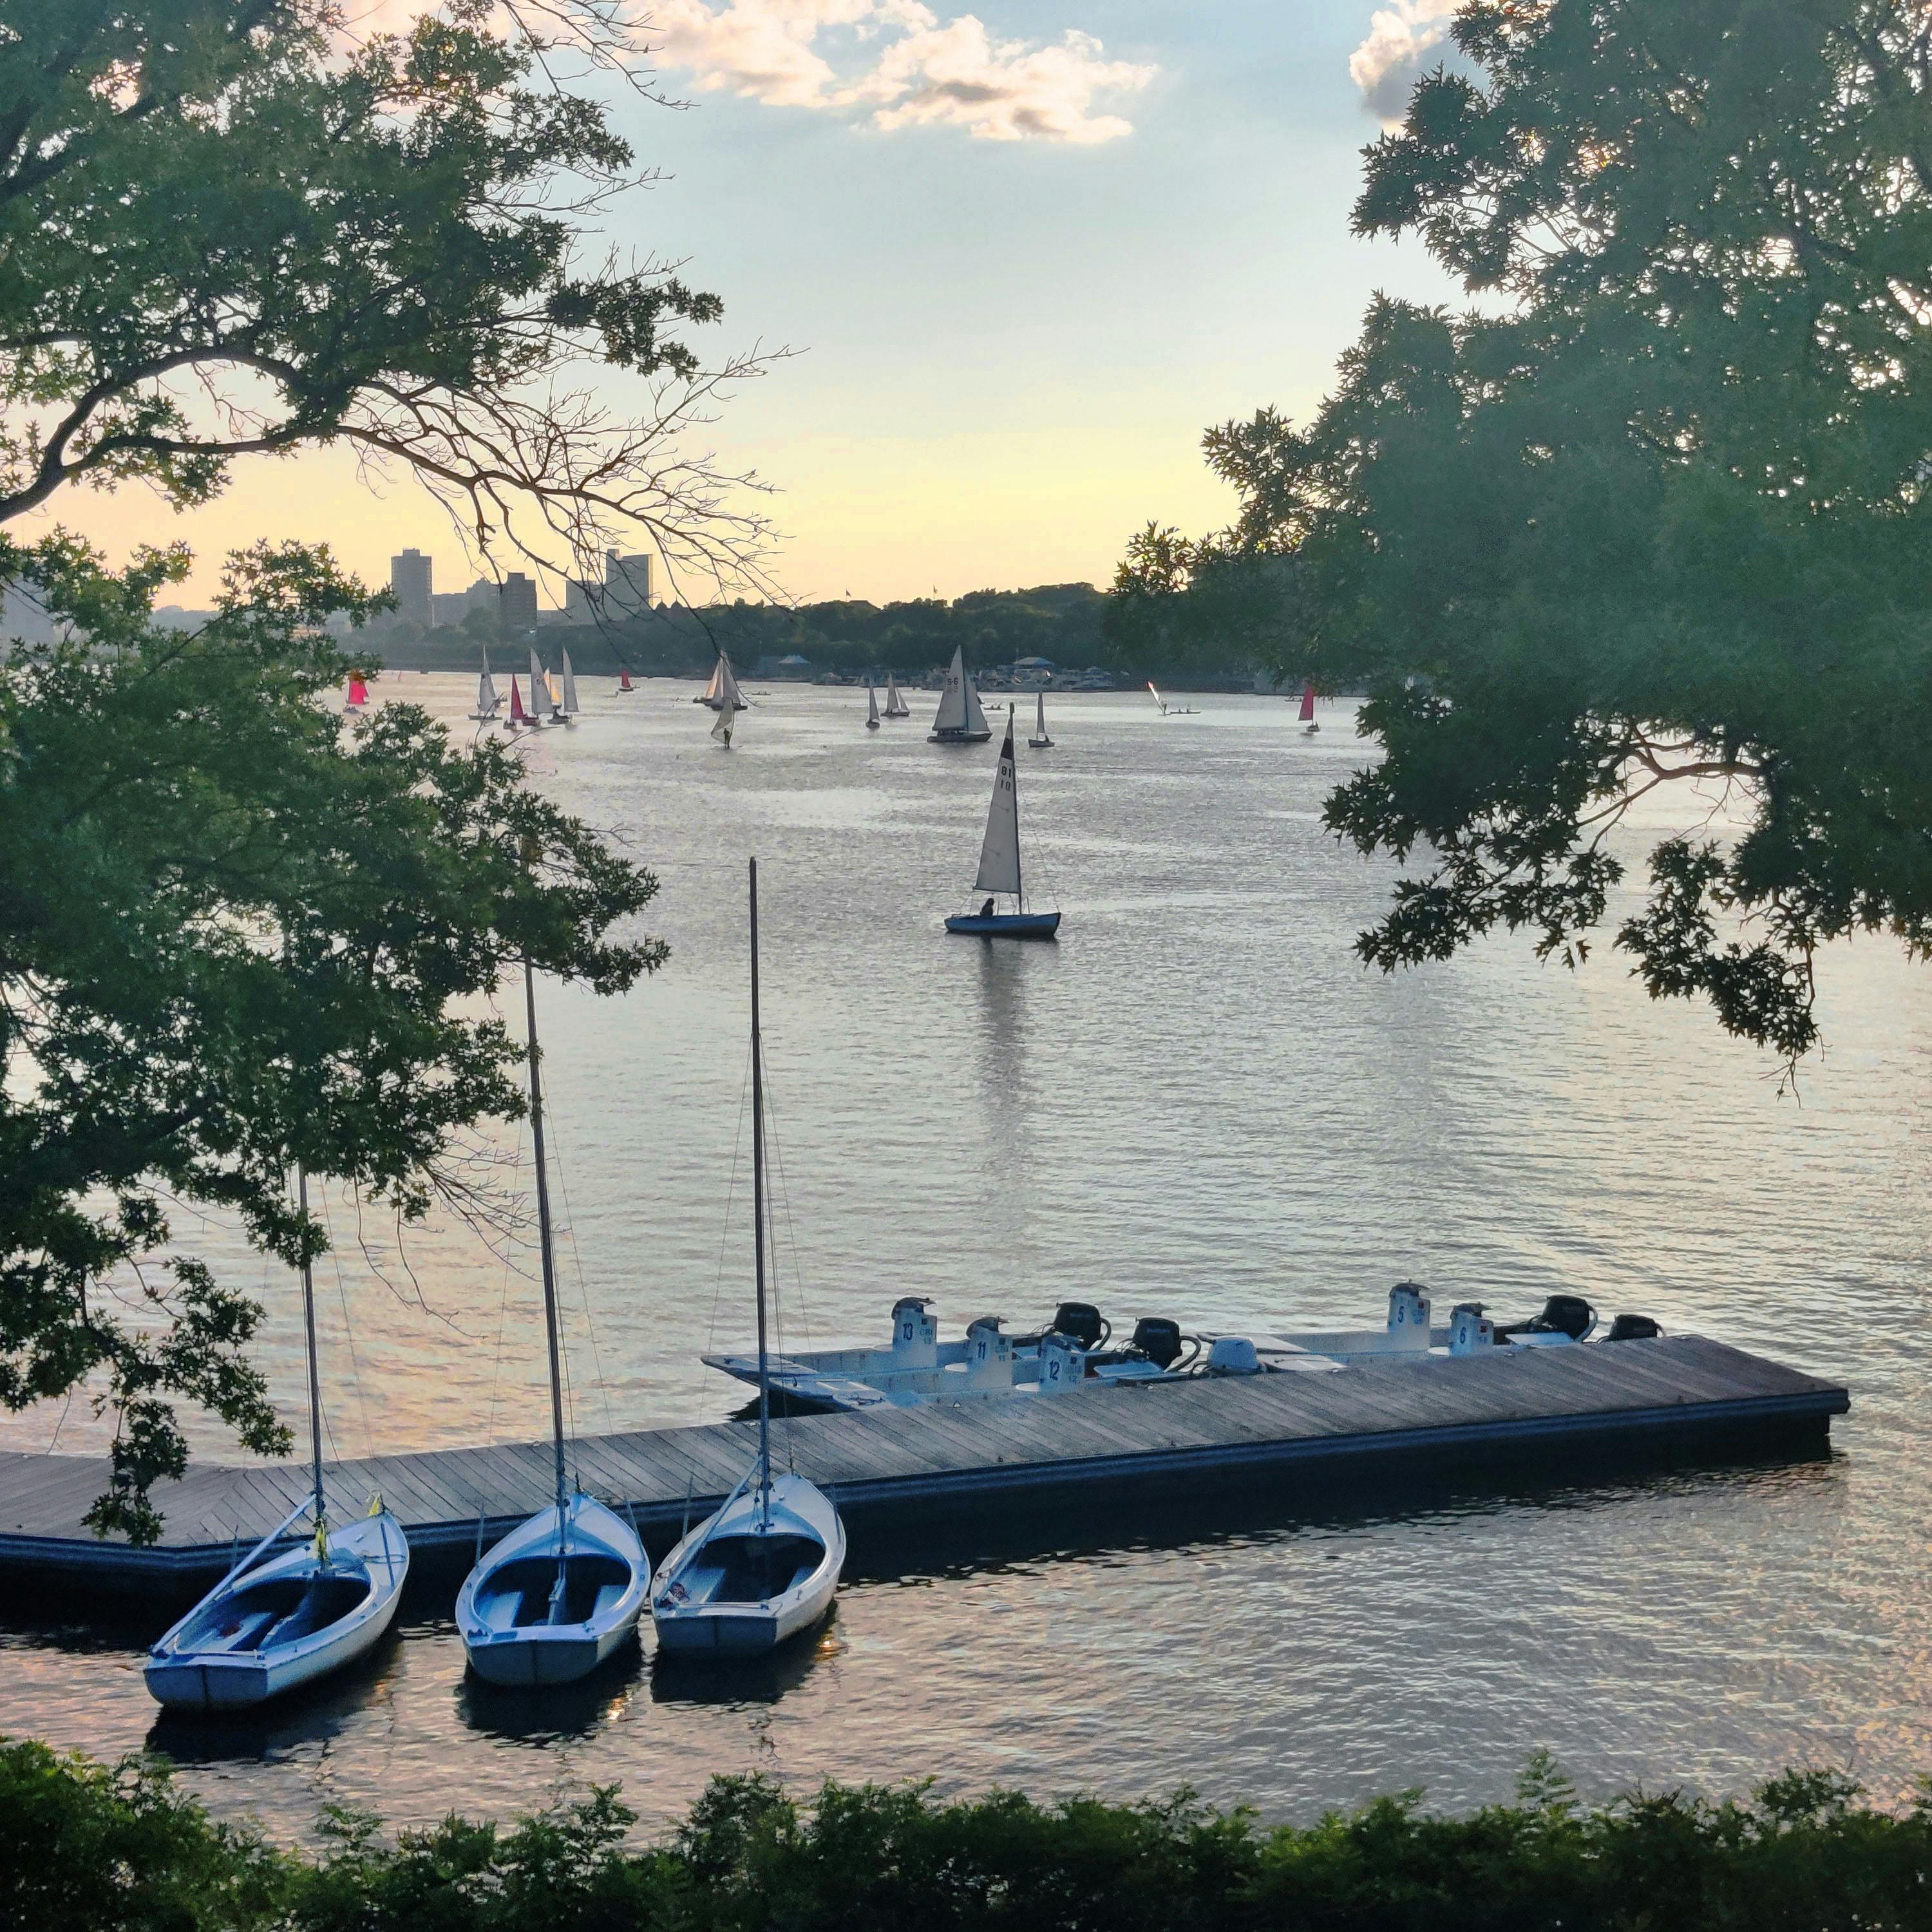 sailboats in the charles river, taken from a pedestrian bridge